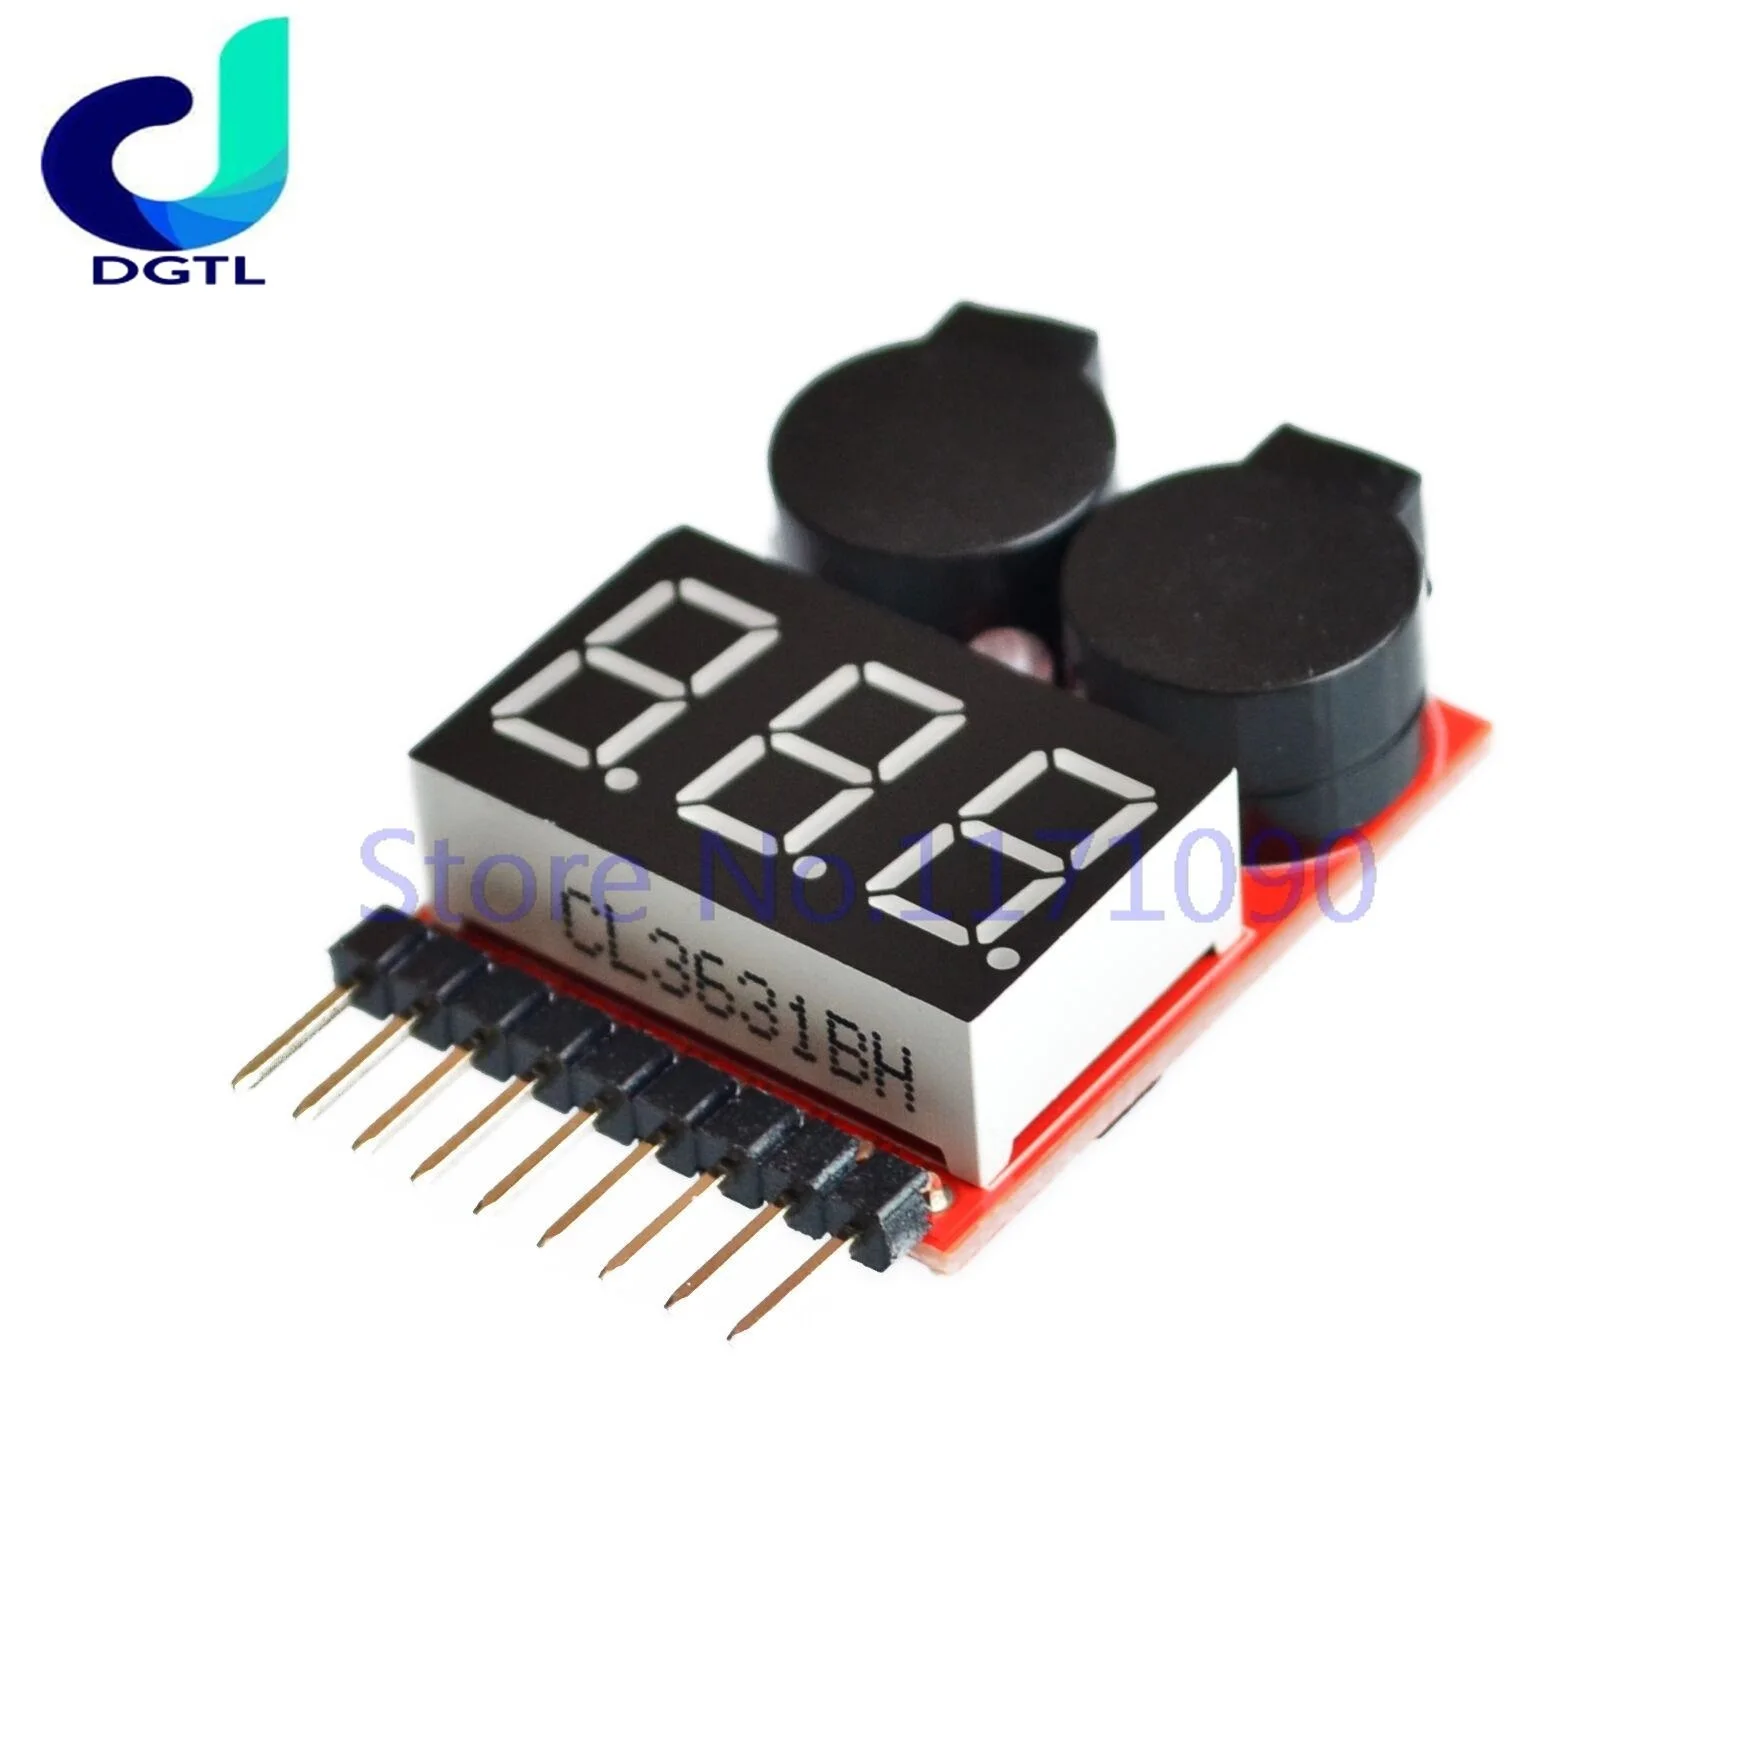 

1-8S Lipo/Li-ion/Fe RC airplane boat etc Battery Voltage 2 IN1 Tester Low Voltage Buzzer Alarm